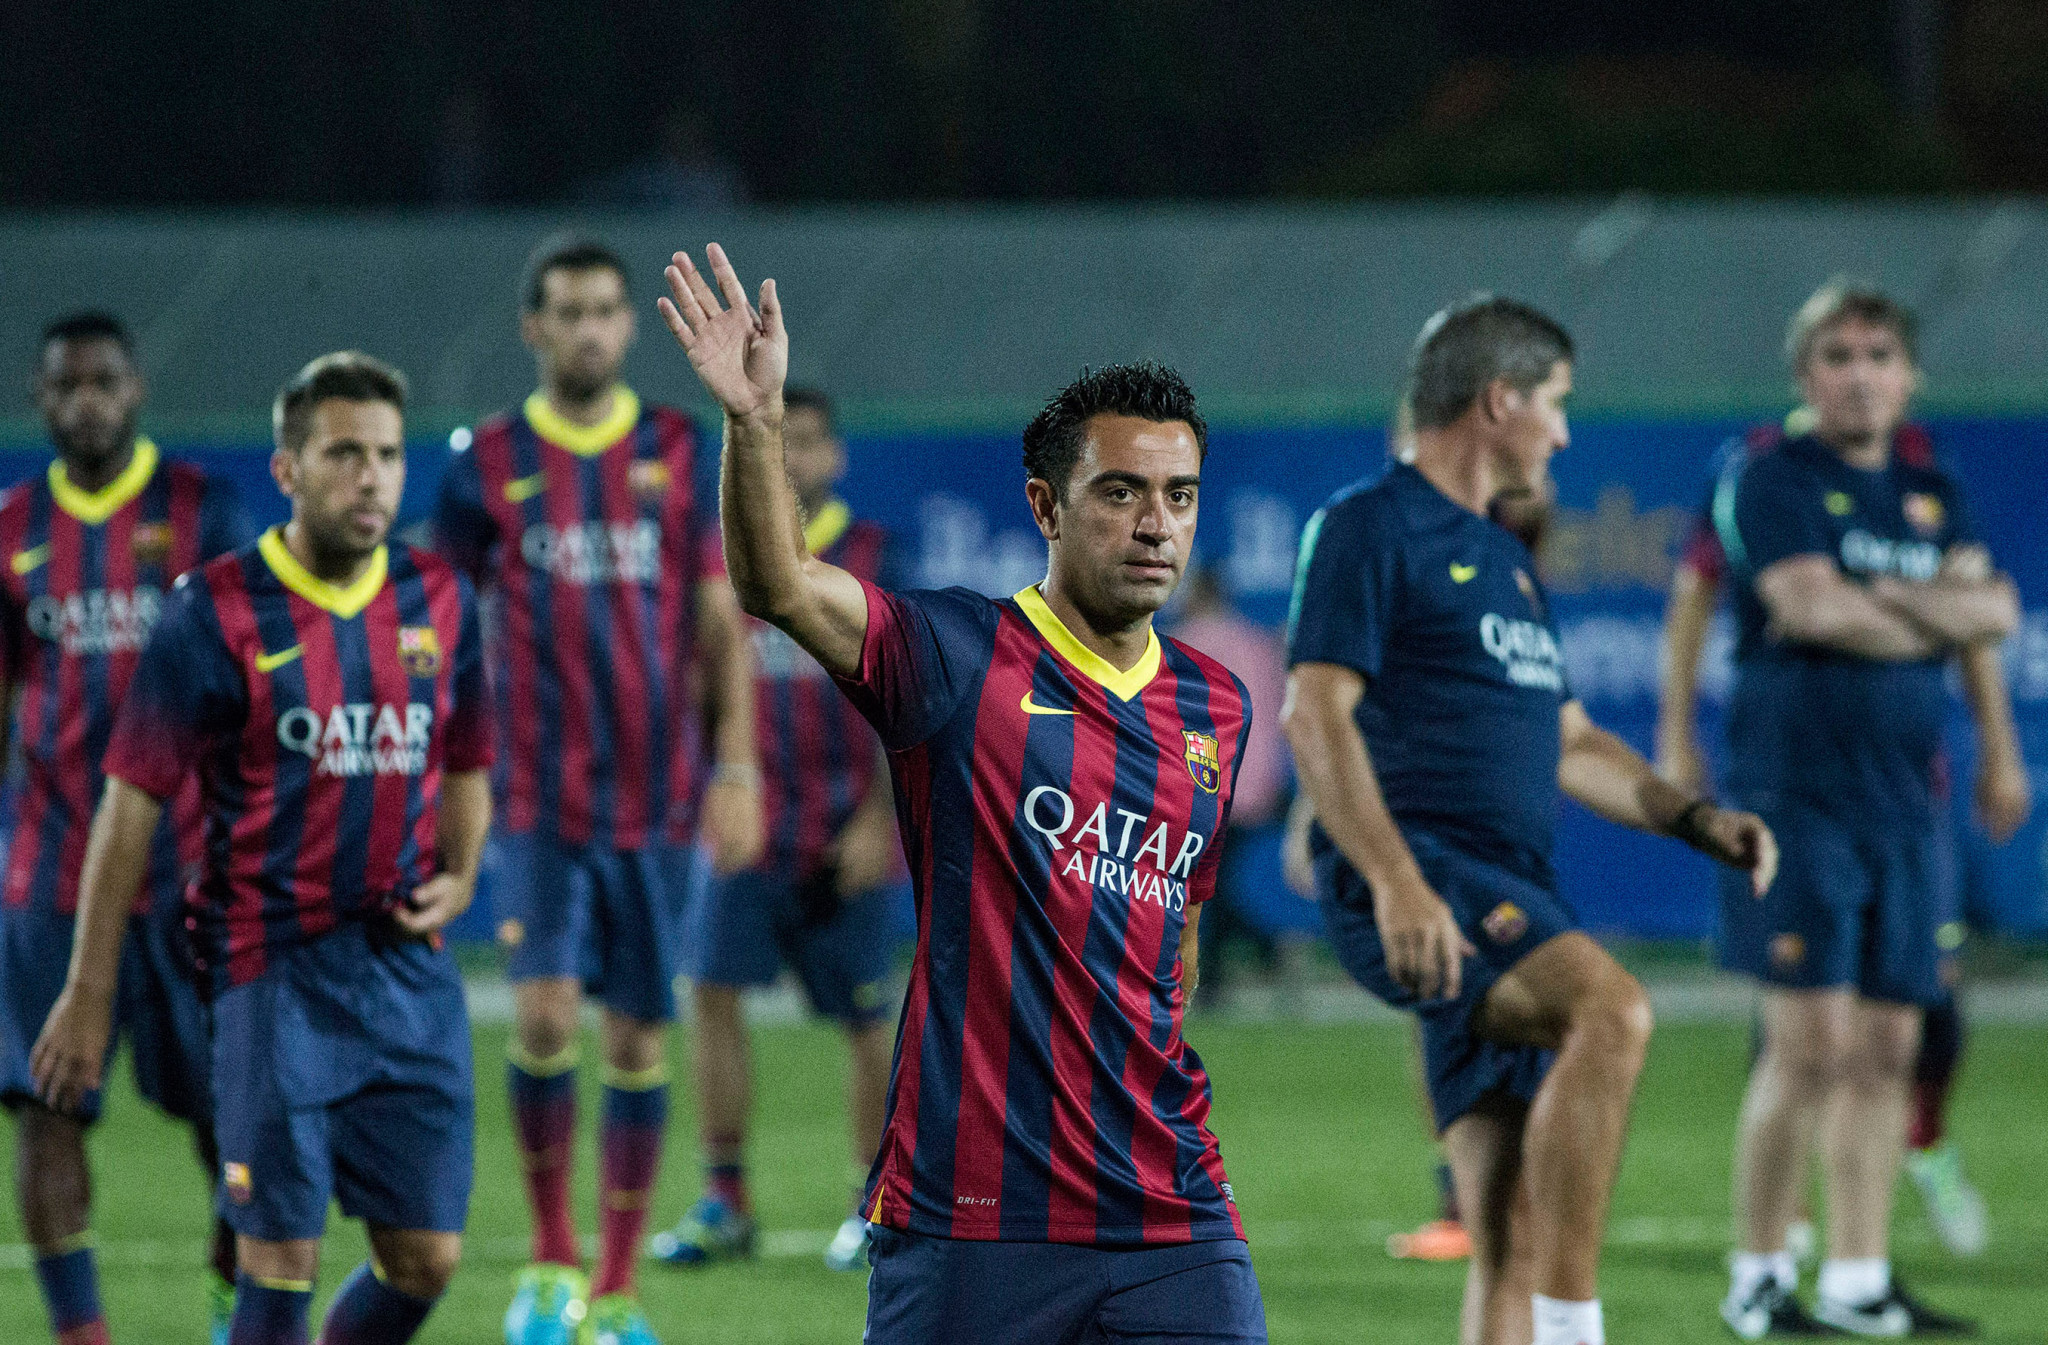 Xavi, an eight-time La Liga champion with Barcelona and current head coach, has claimed that he had no knowledge of the club trying to bribe referees ©Getty Images